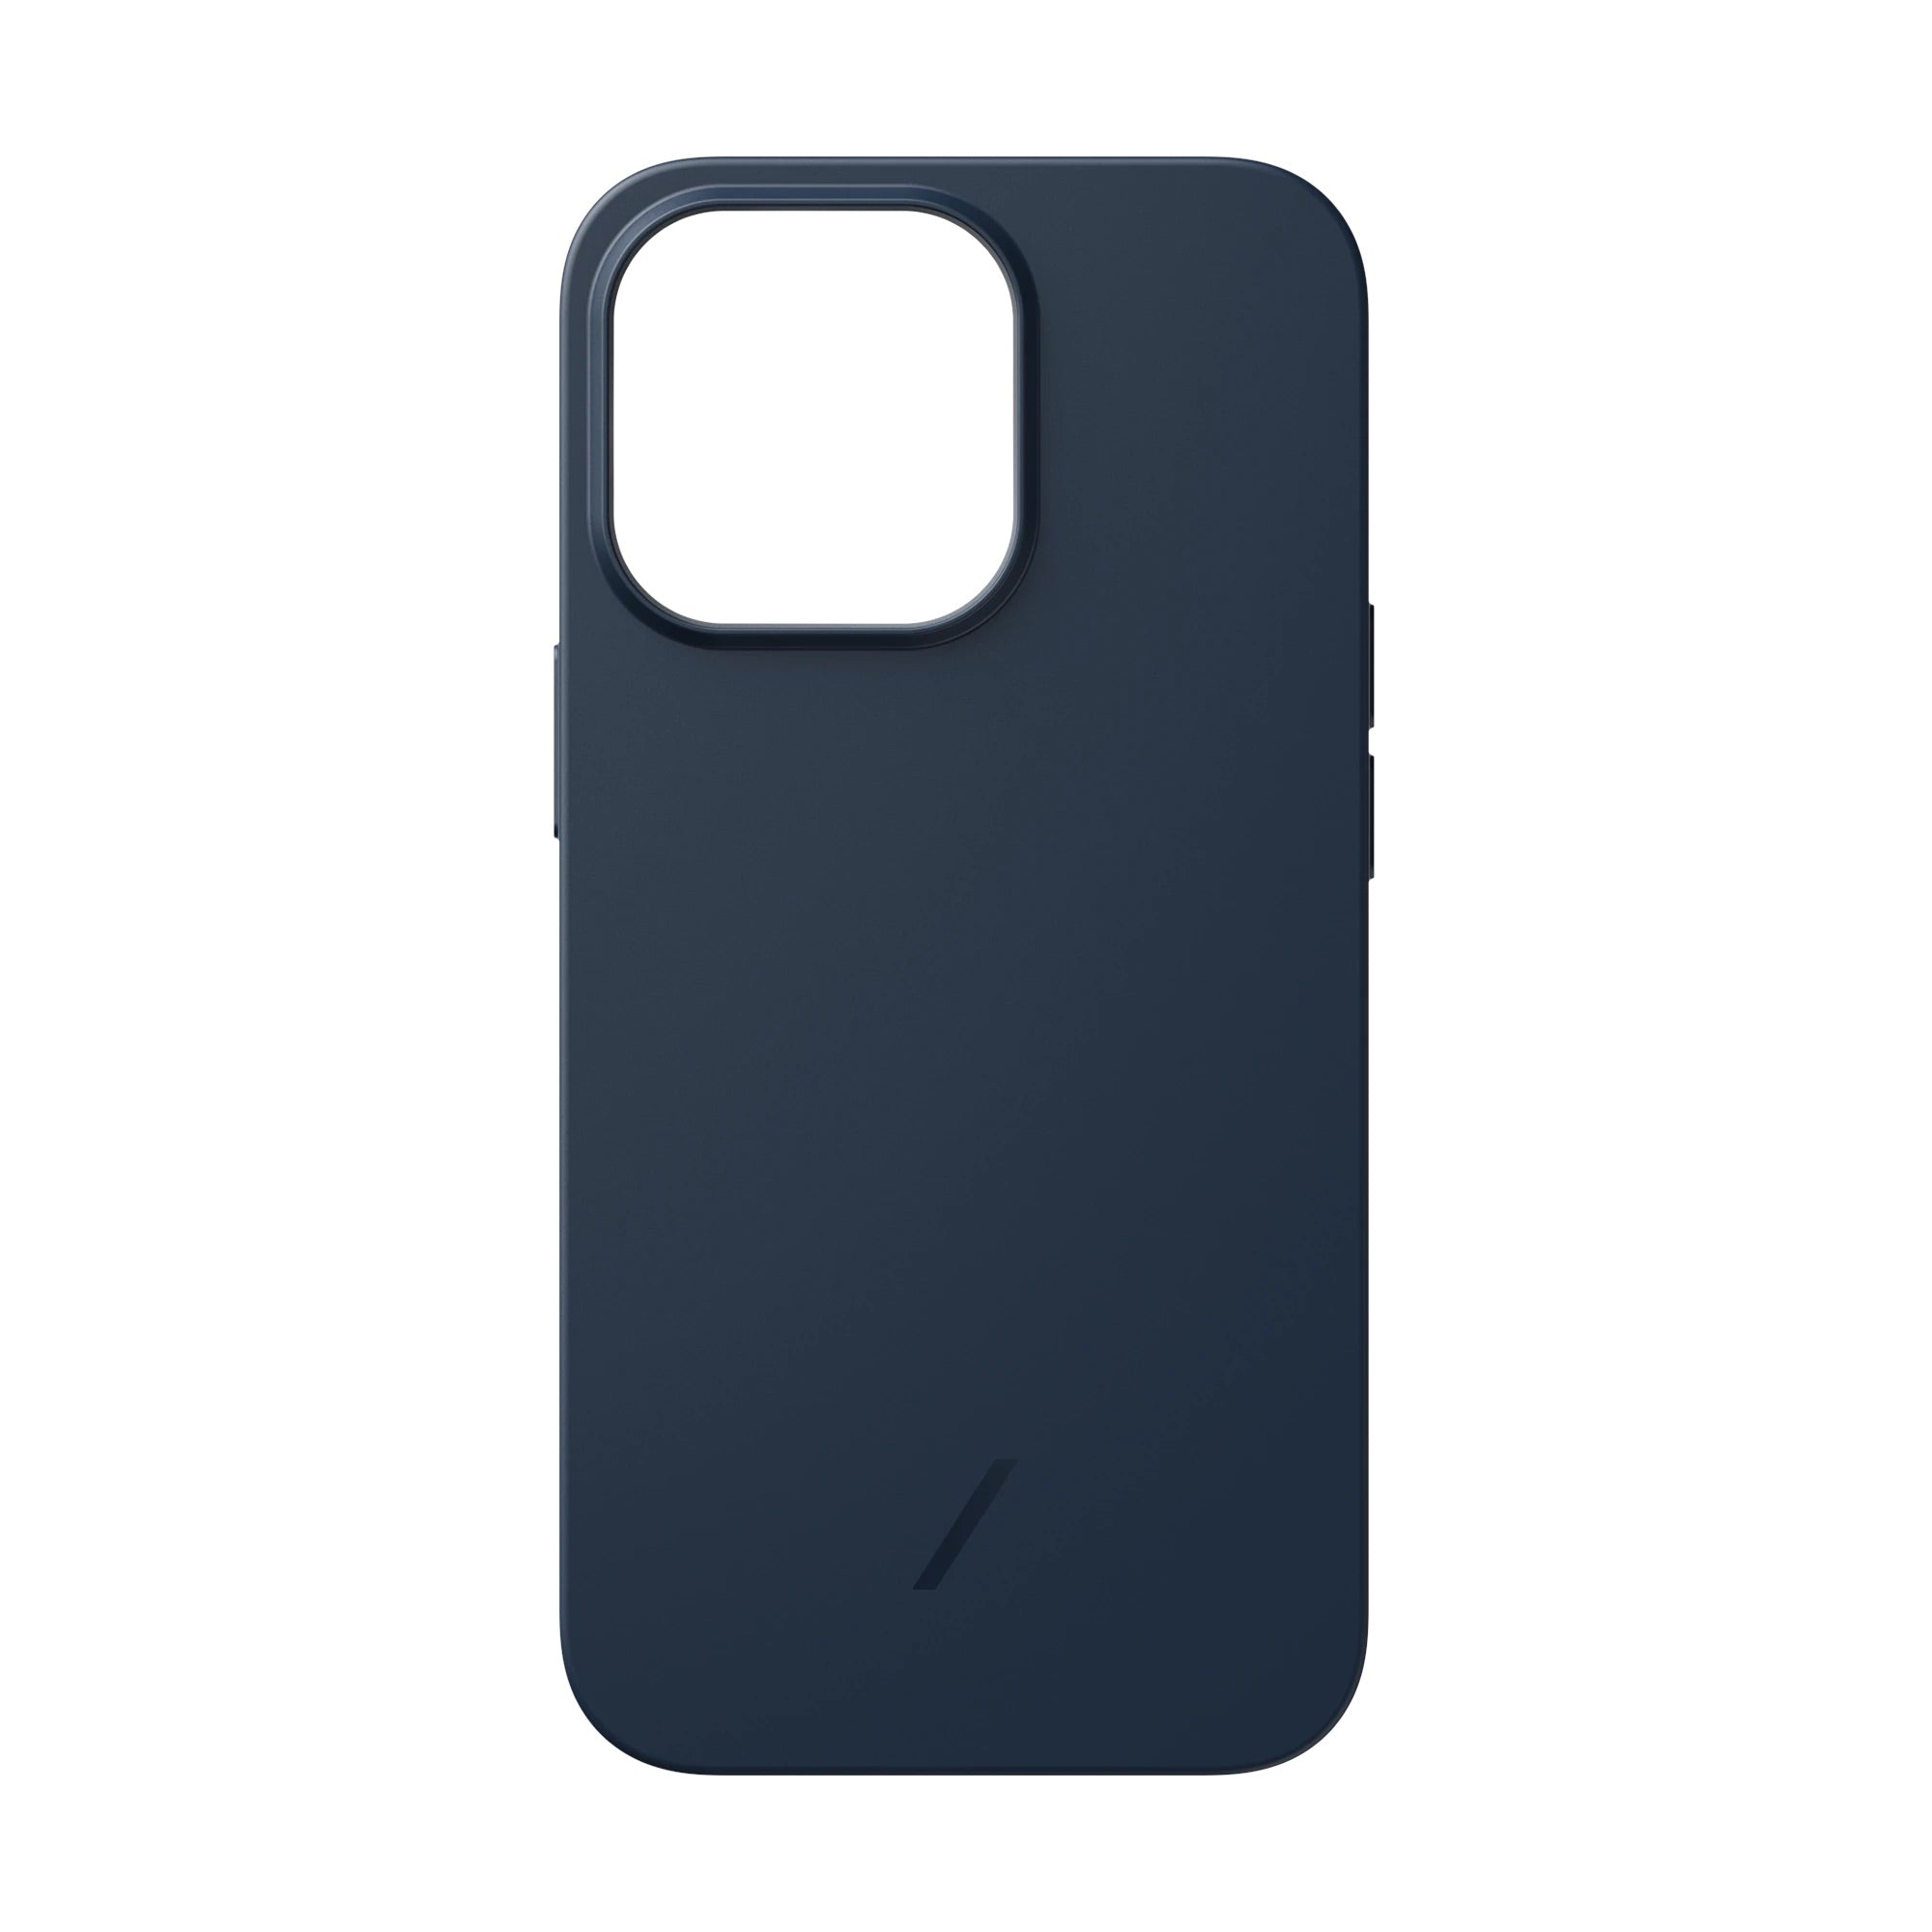 Native Union Clic Pop Magnetic Iphone Case - Navy (iphone 13 Pro)